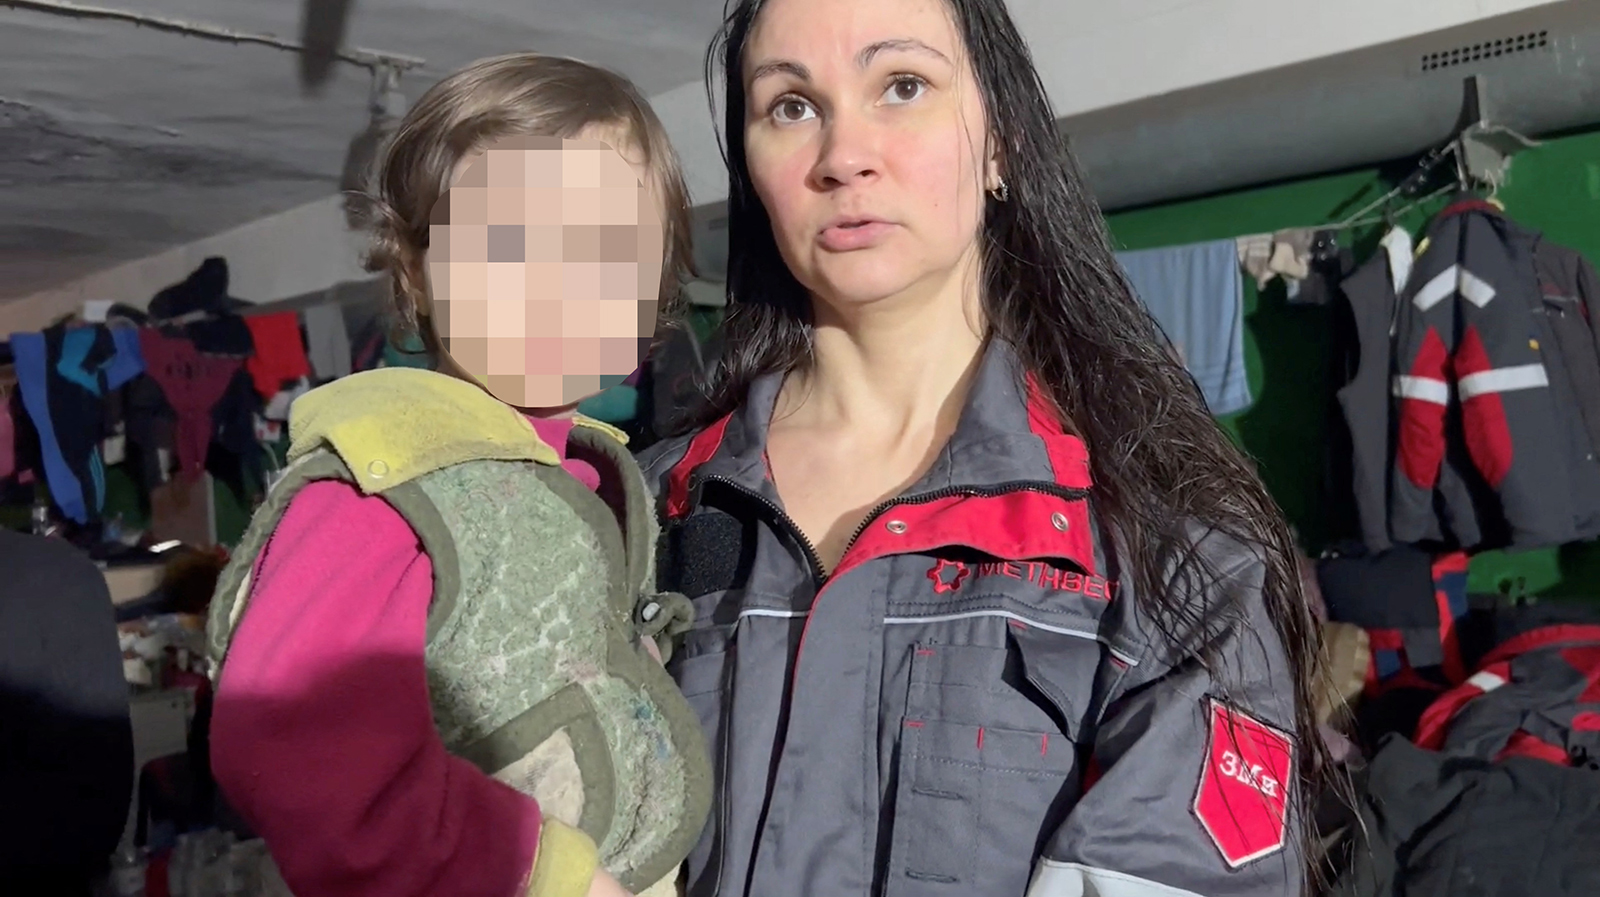 A woman holding a child speaks as they take shelter in a bunker of the Azovstal steelworks in Mariupol, Ukraine in this image released on April 23. A portion of this photo has been blurred by CNN to protect identity. 